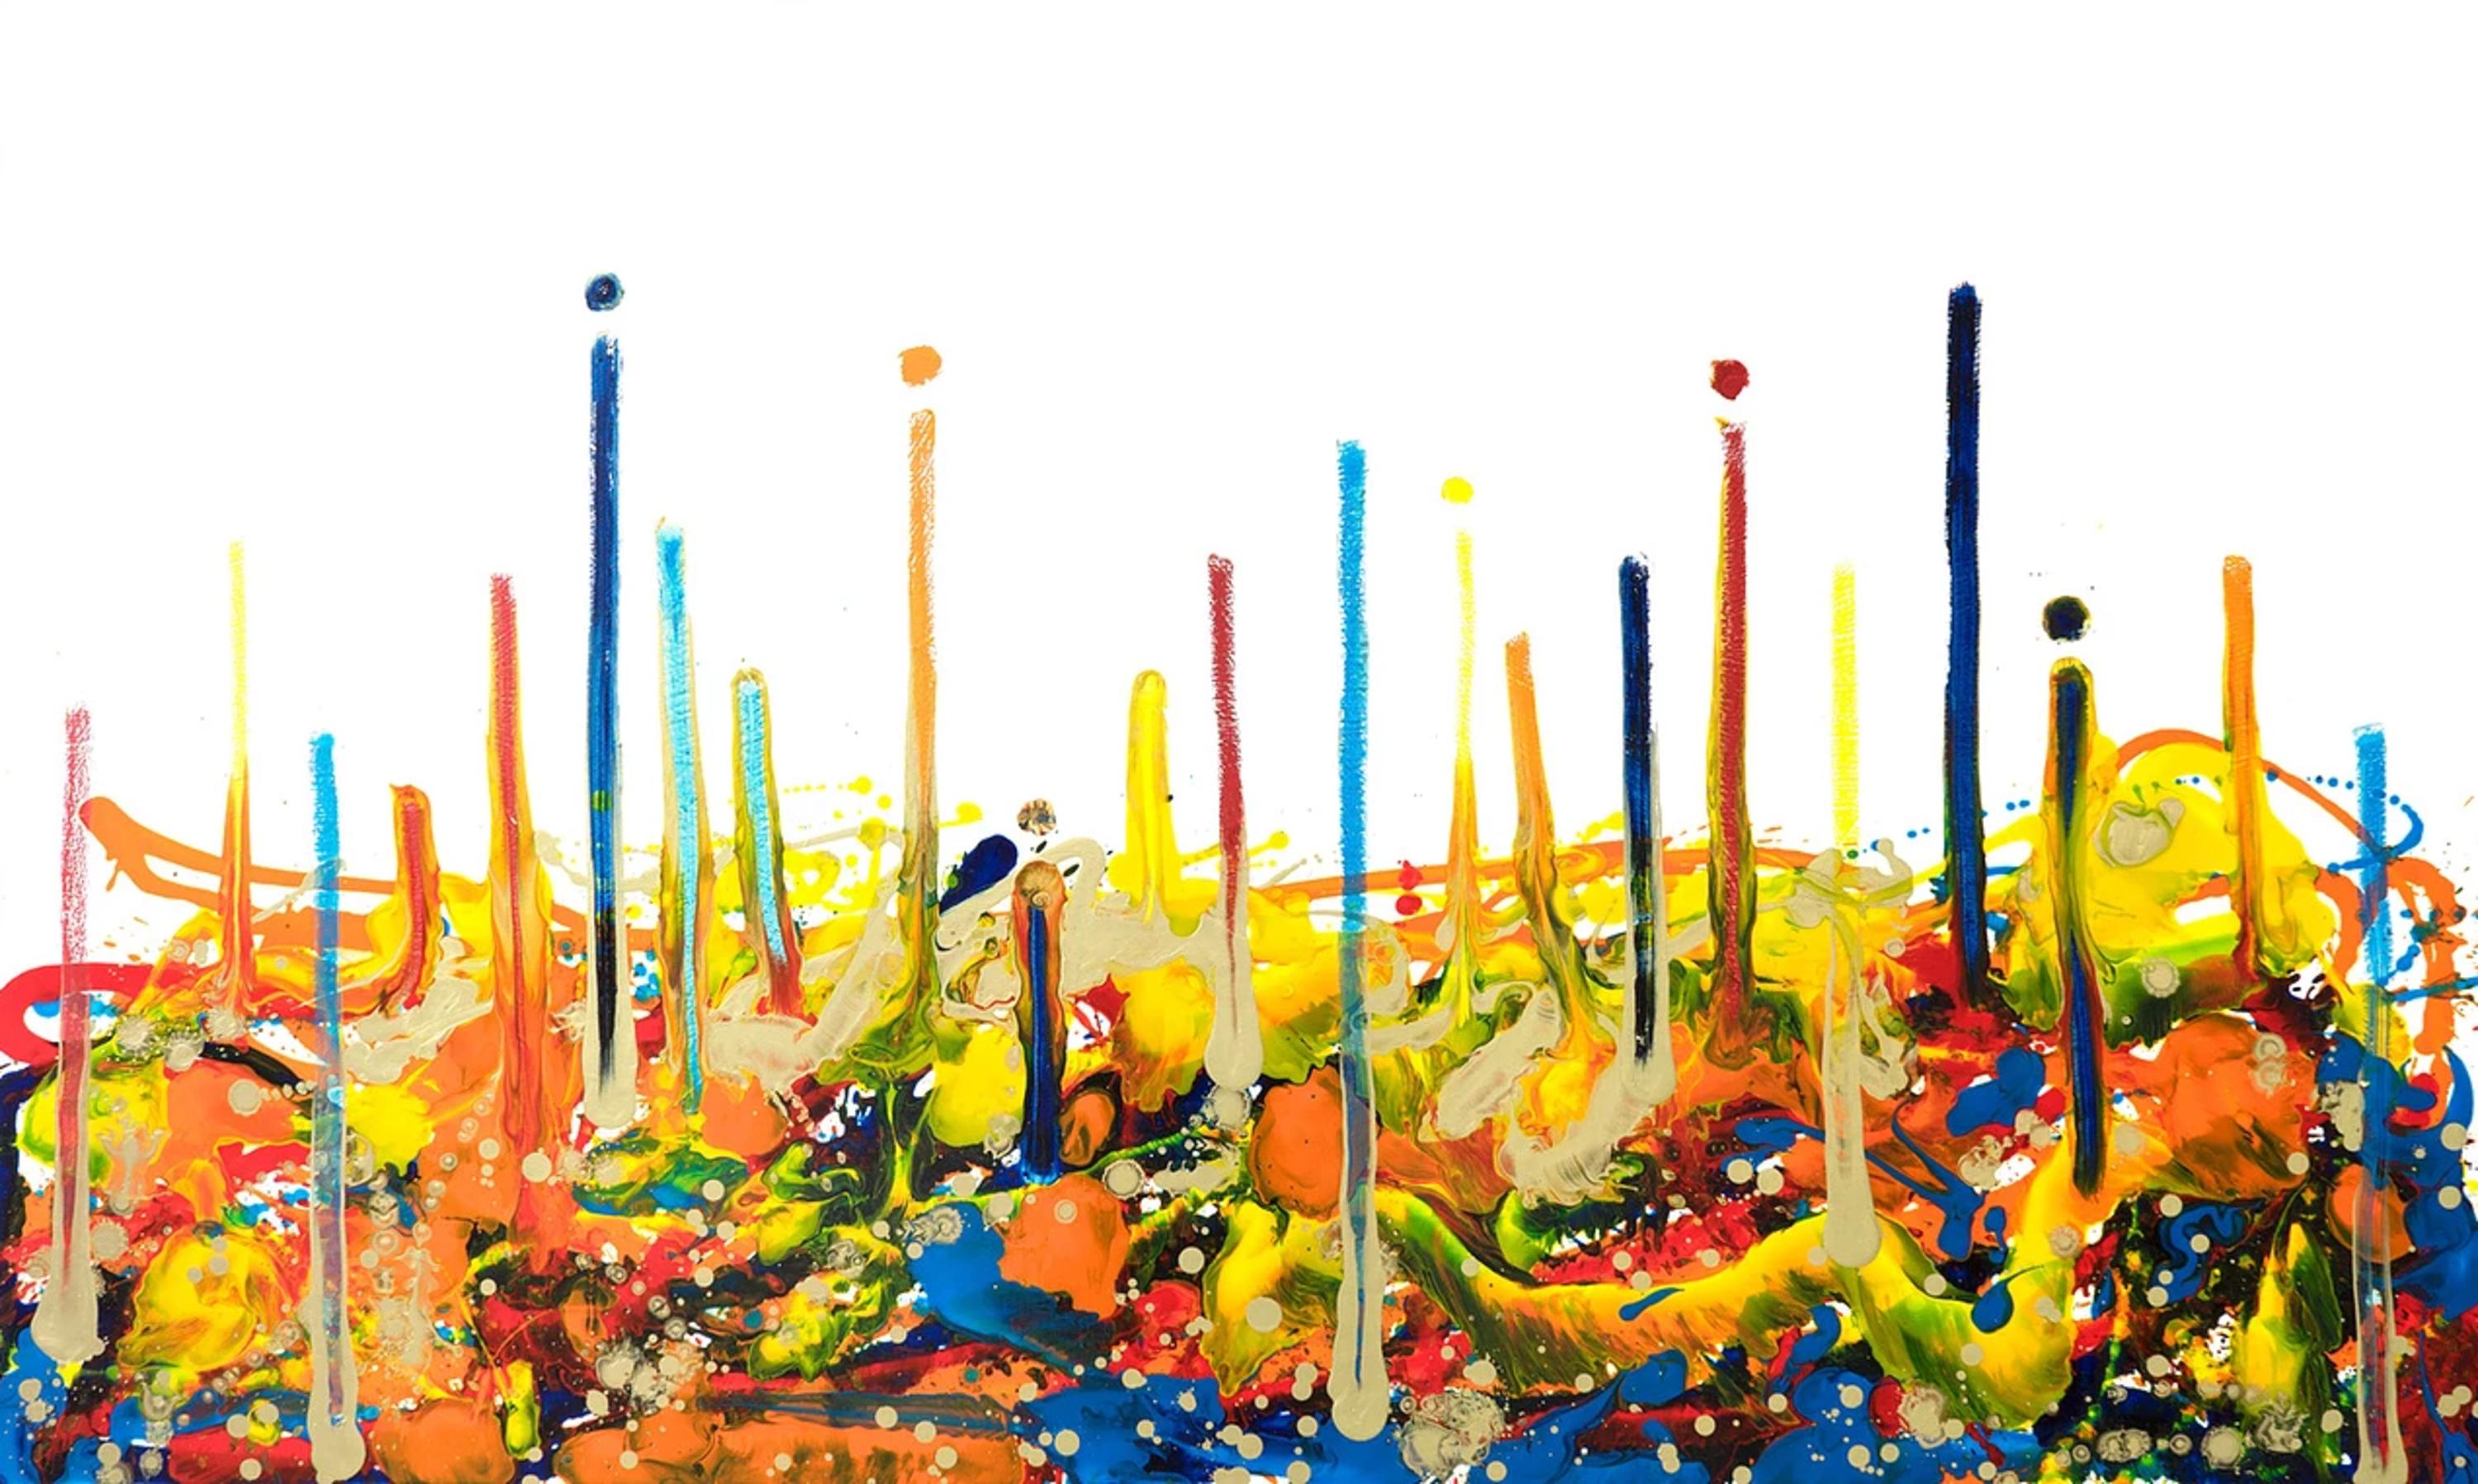 Seungyoon Choi Landscape Painting - Cross-section of the moment 1, Yellow Abstract Expressionist Oil Painting Canvas